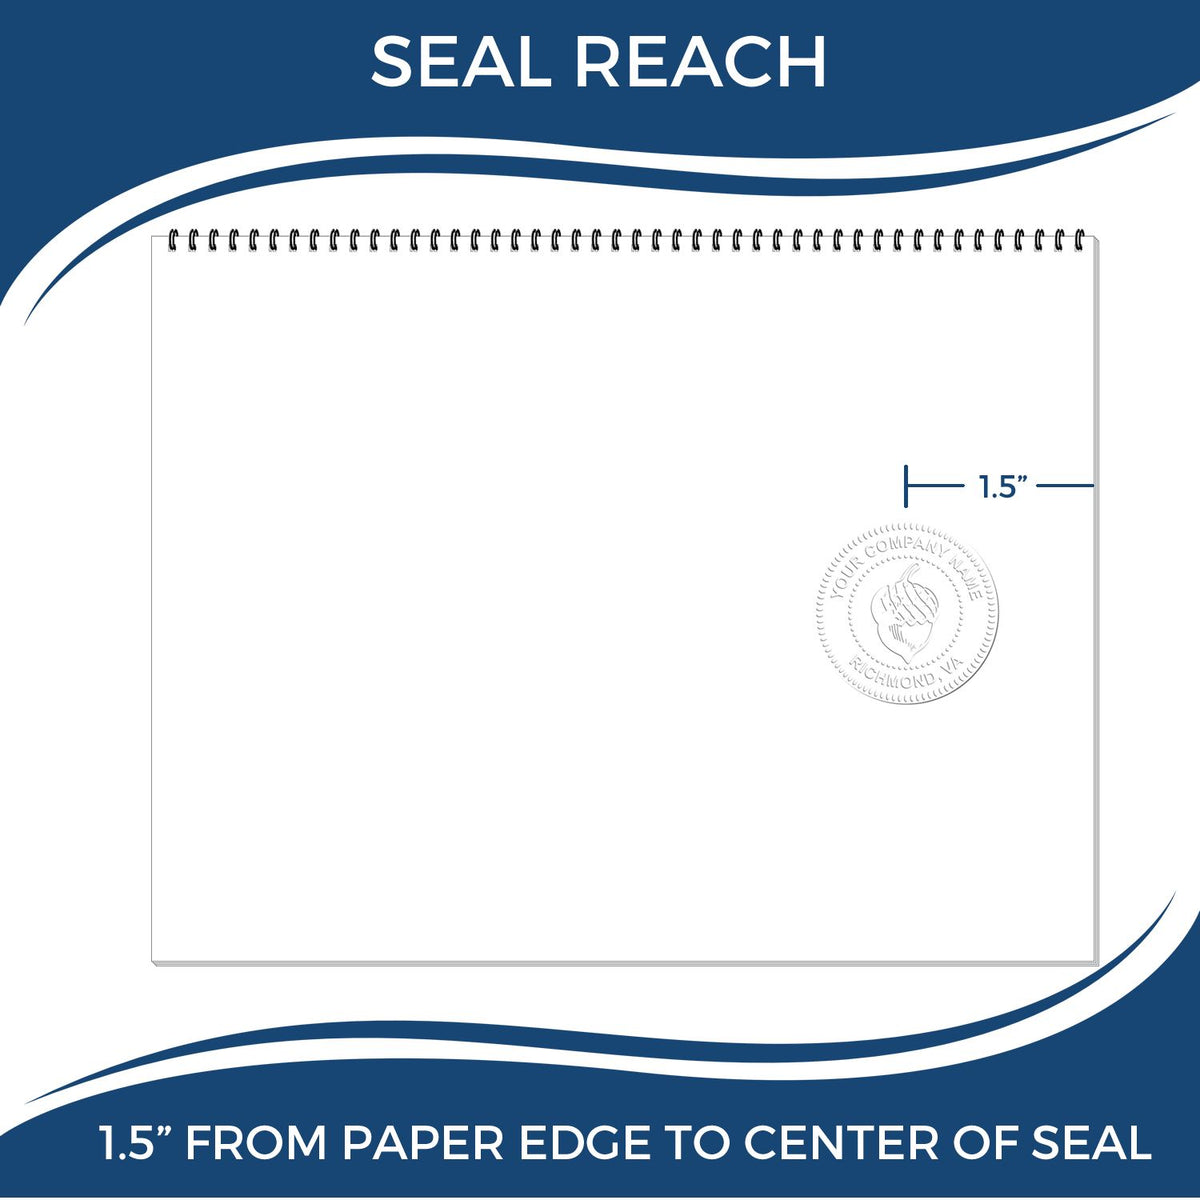 An infographic showing the seal reach which is represented by a ruler and a miniature seal image of the Hybrid Oklahoma Geologist Seal